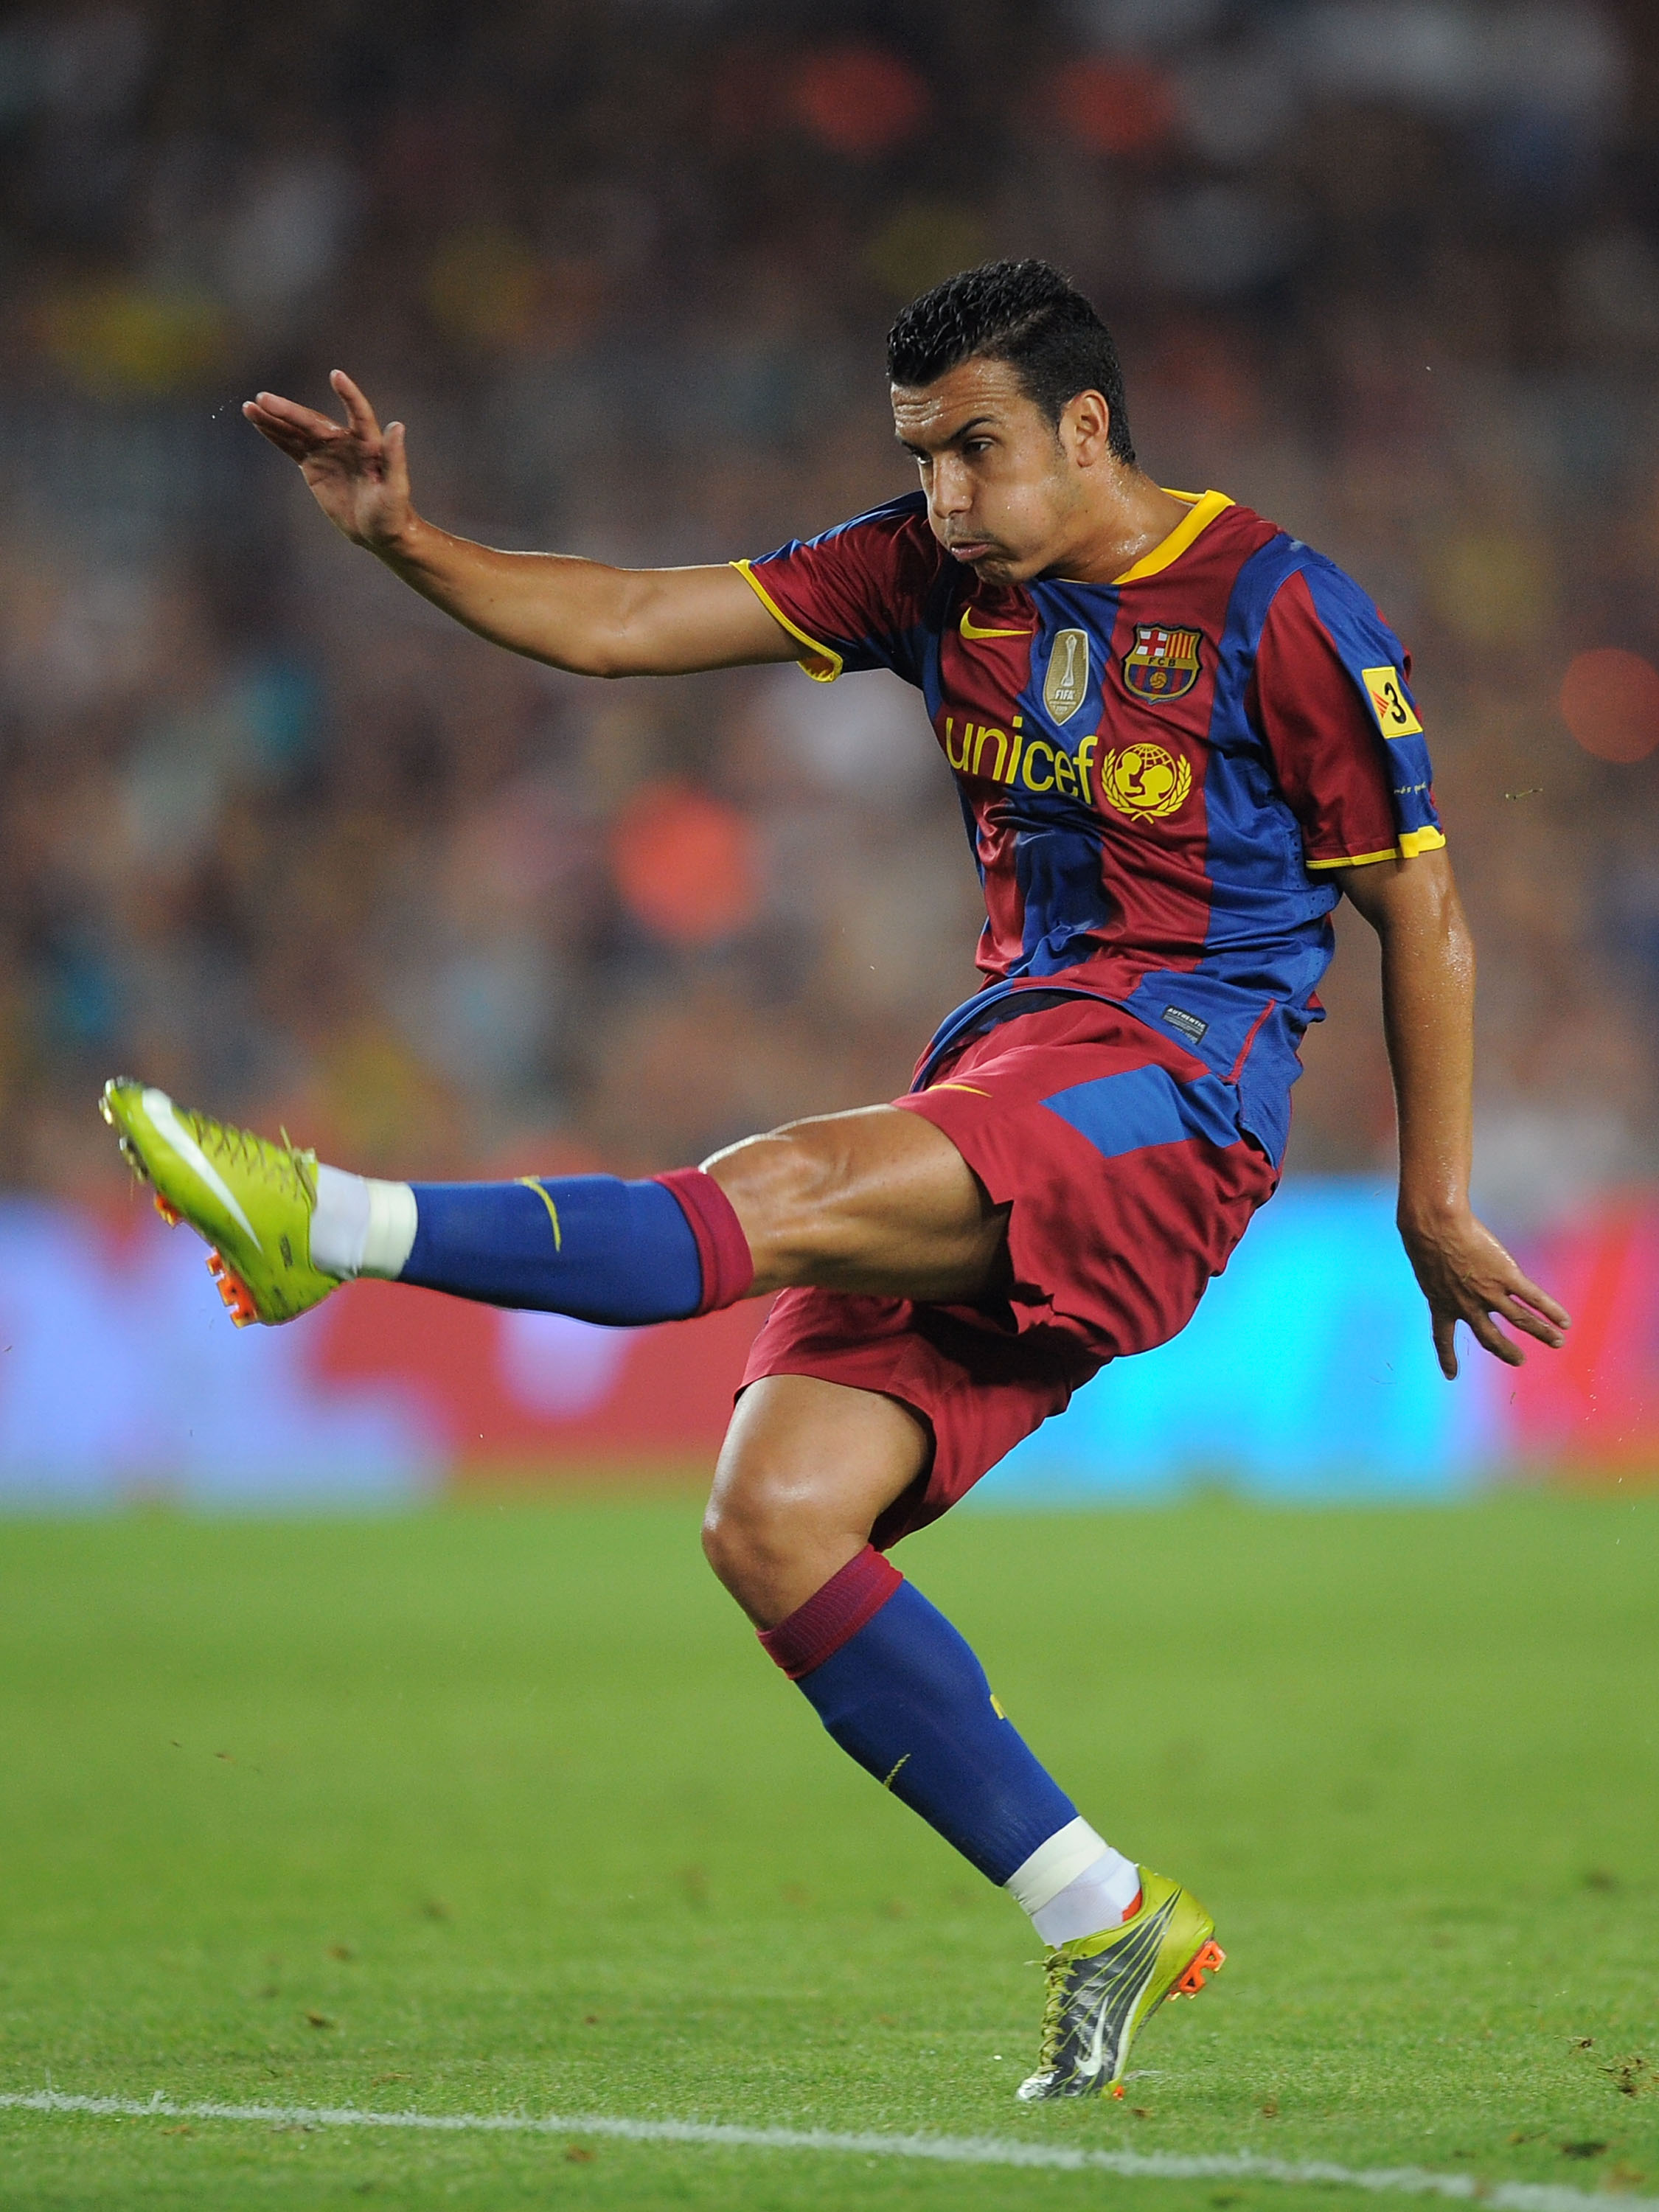 BARCELONA, SPAIN - AUGUST 25: Pedro Rodriguez of Barcelona in action during the Joan Gamper Trophy match between Barcelona and AC Milan at Camp Nou stadium on August 25, 2010 in Barcelona, Spain.  (Photo by Denis Doyle/Getty Images)